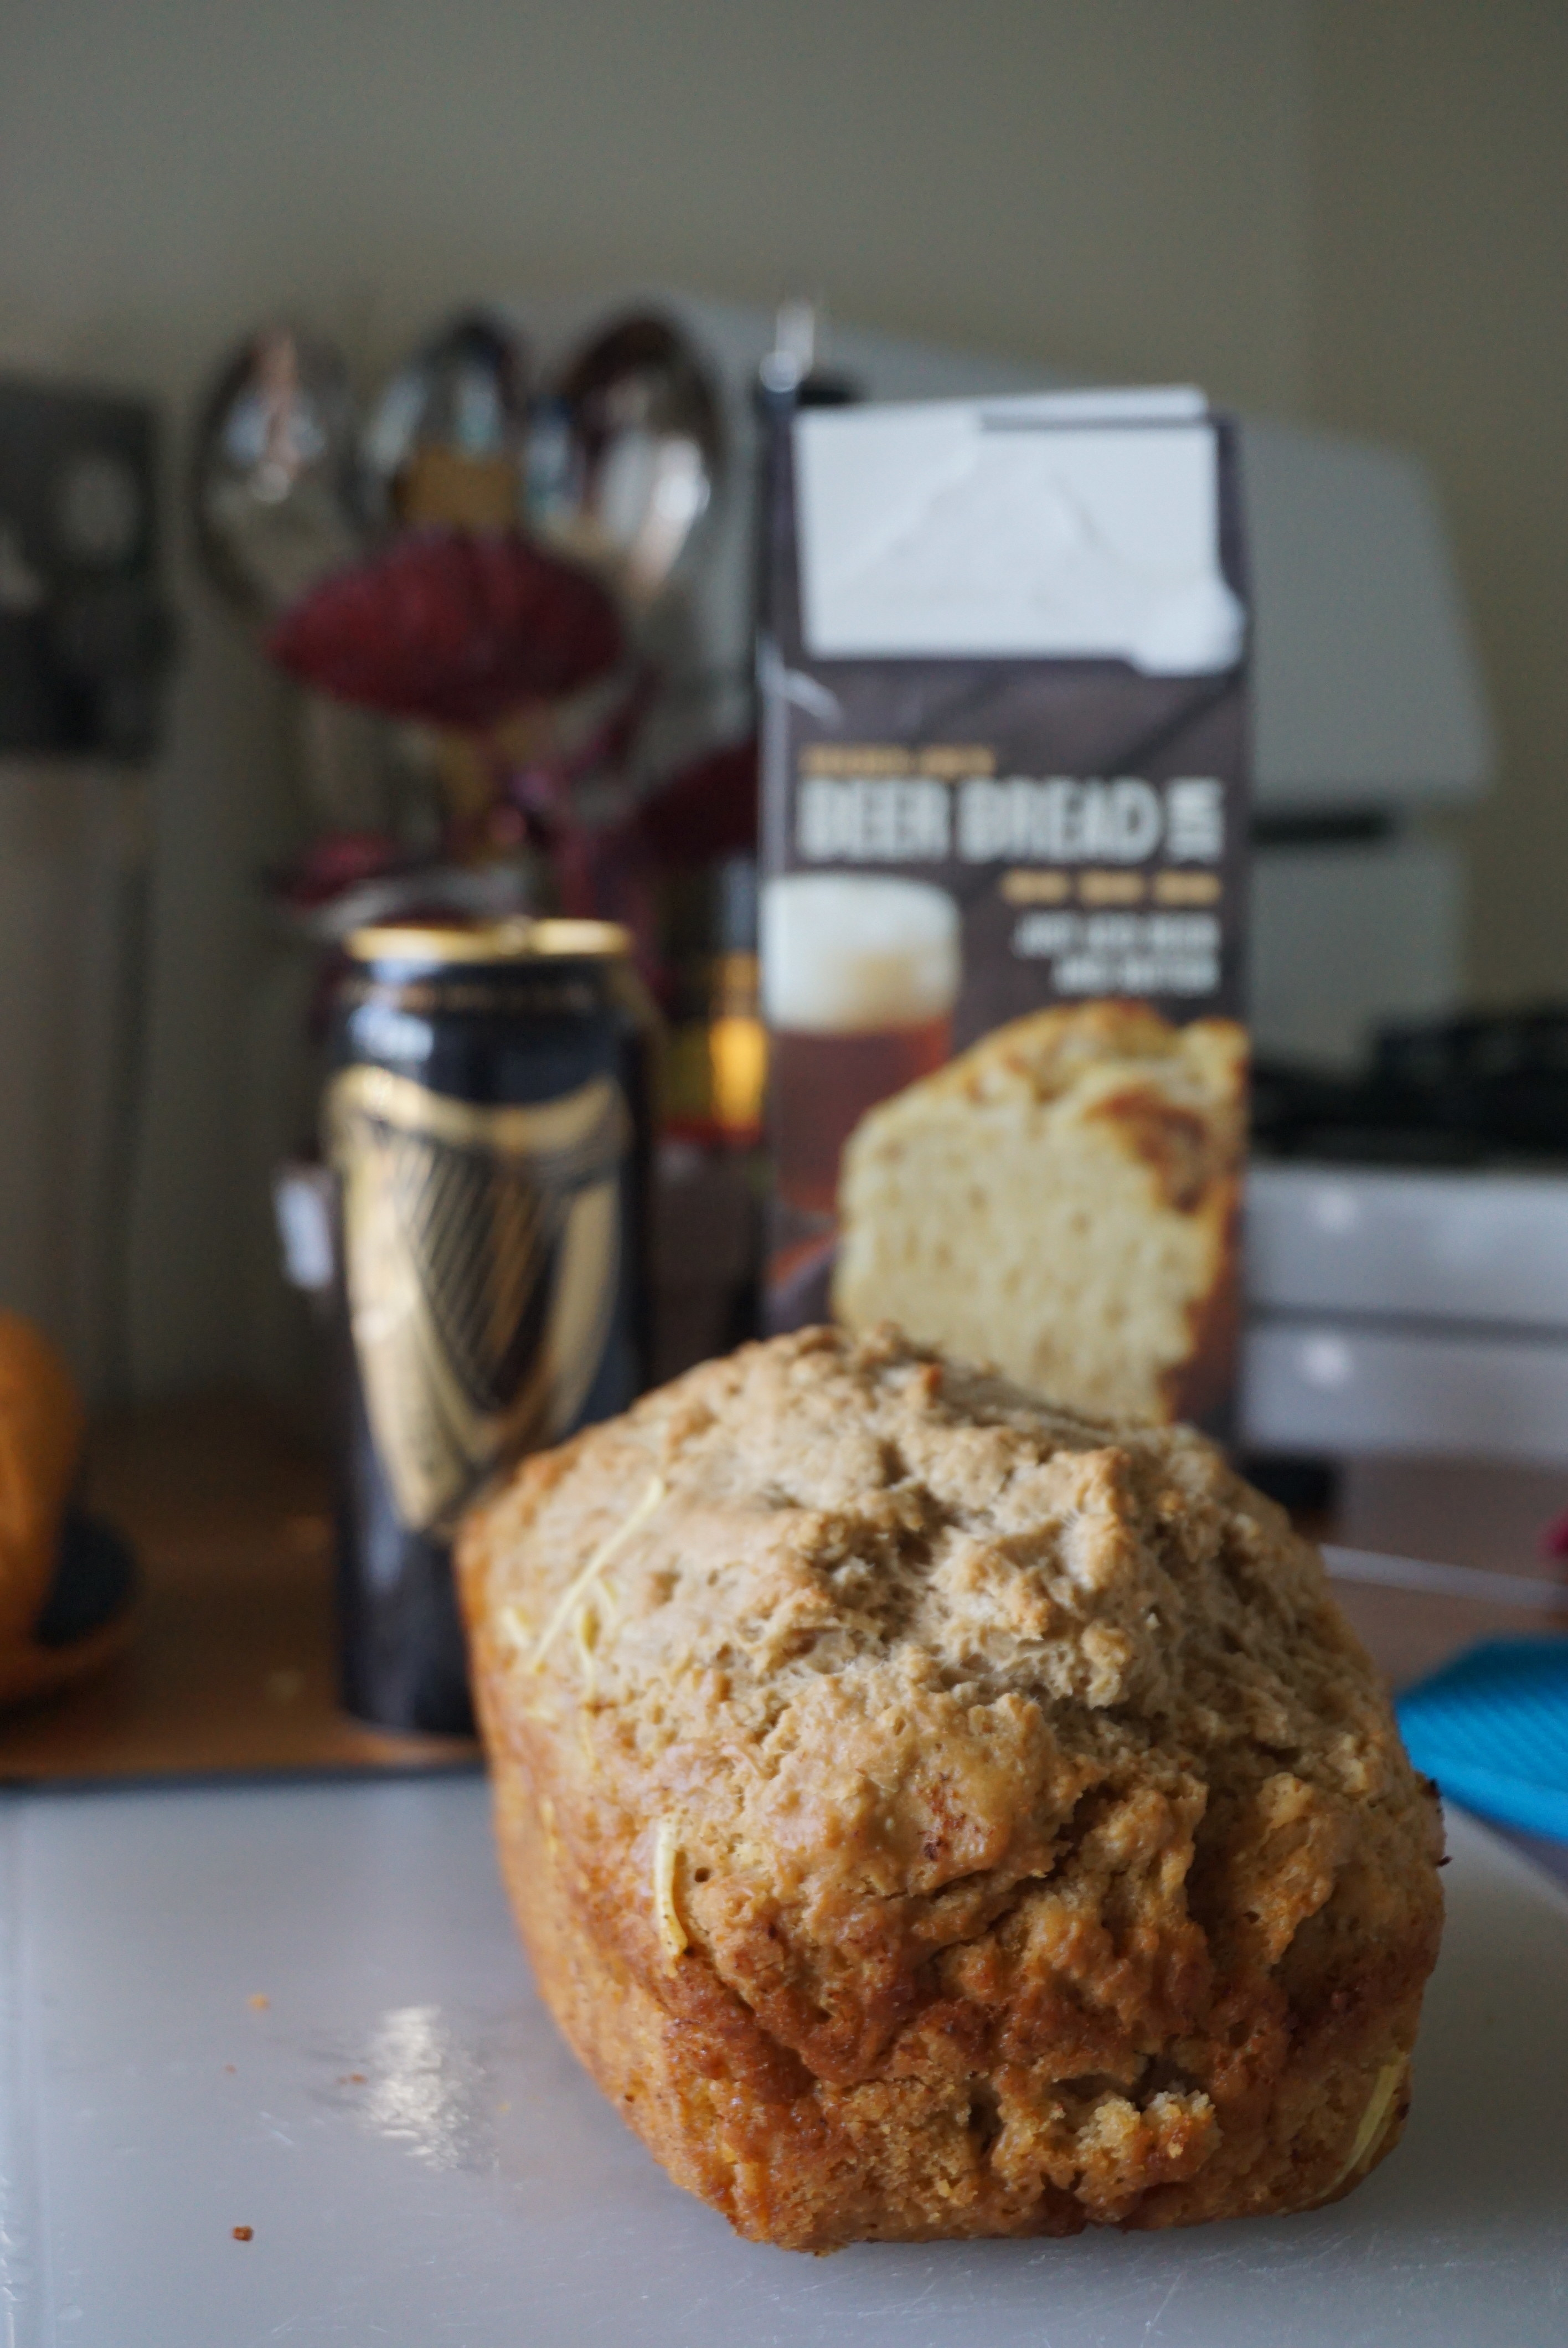 The final beer bread in front of the packaging